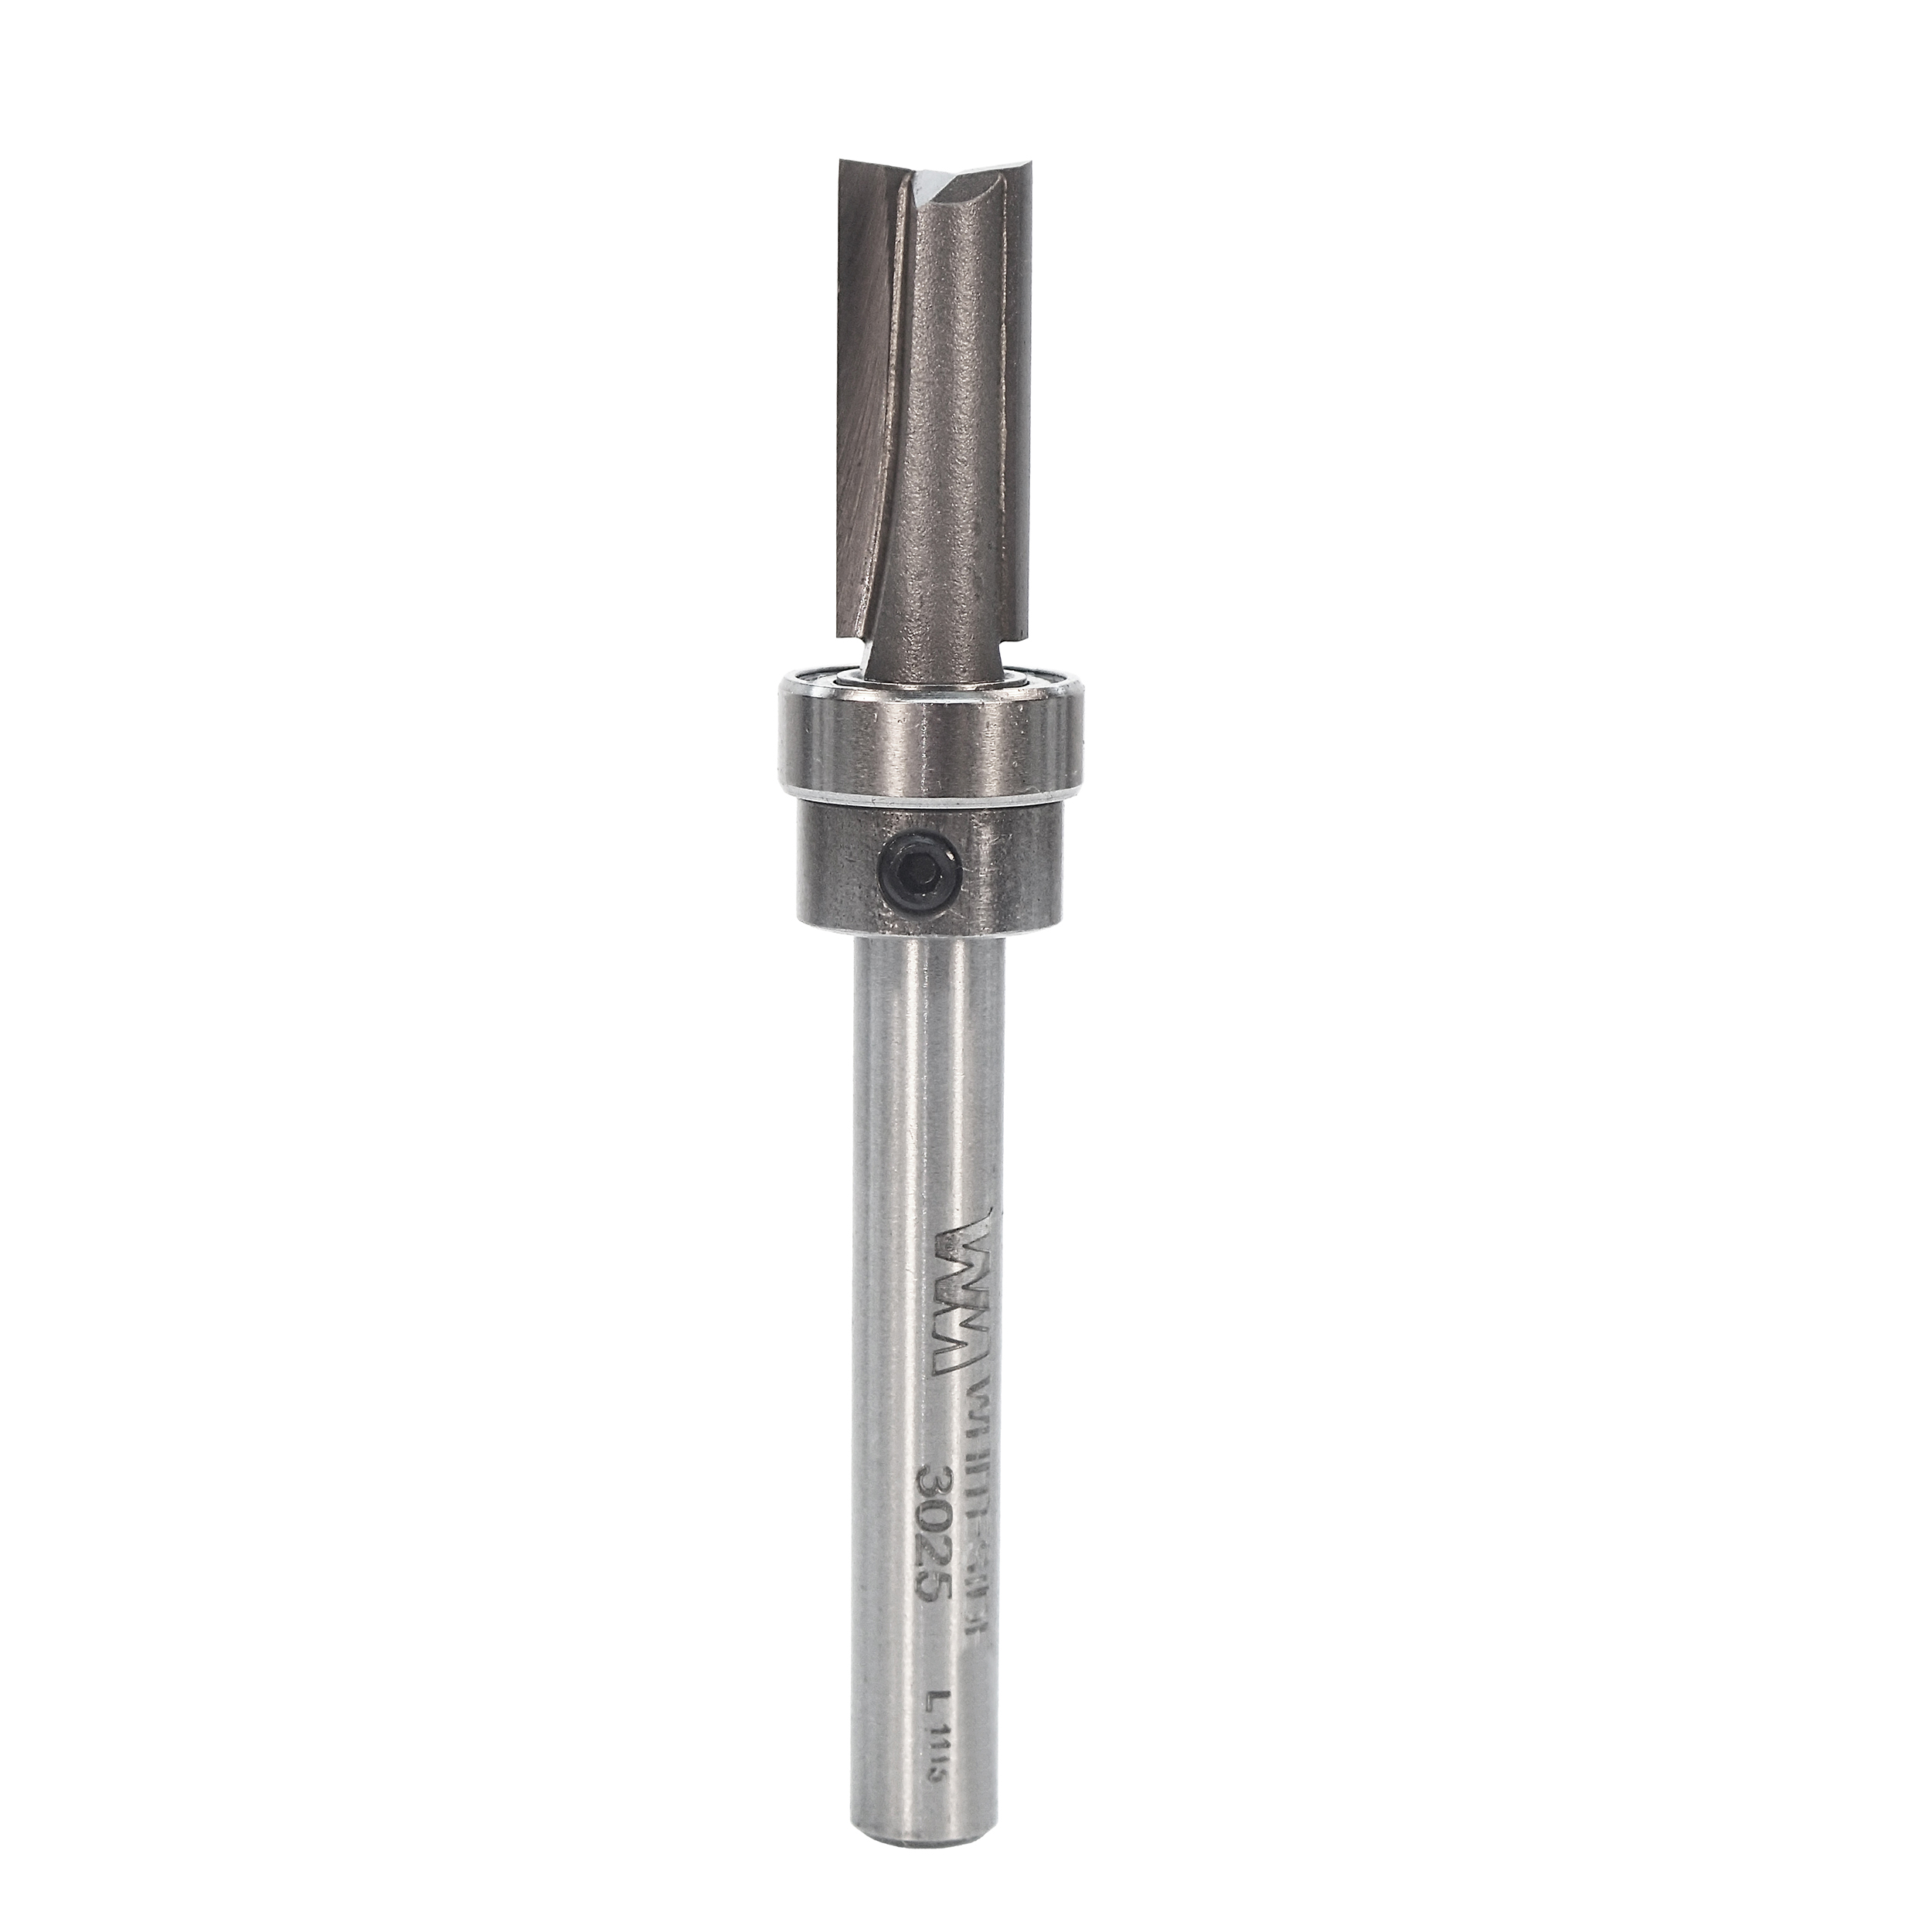 3025 Template Router Bit With Oversize Bearings 5/16" D X 3/4" Cl X 2-3/4" Ol 1/2" Bd